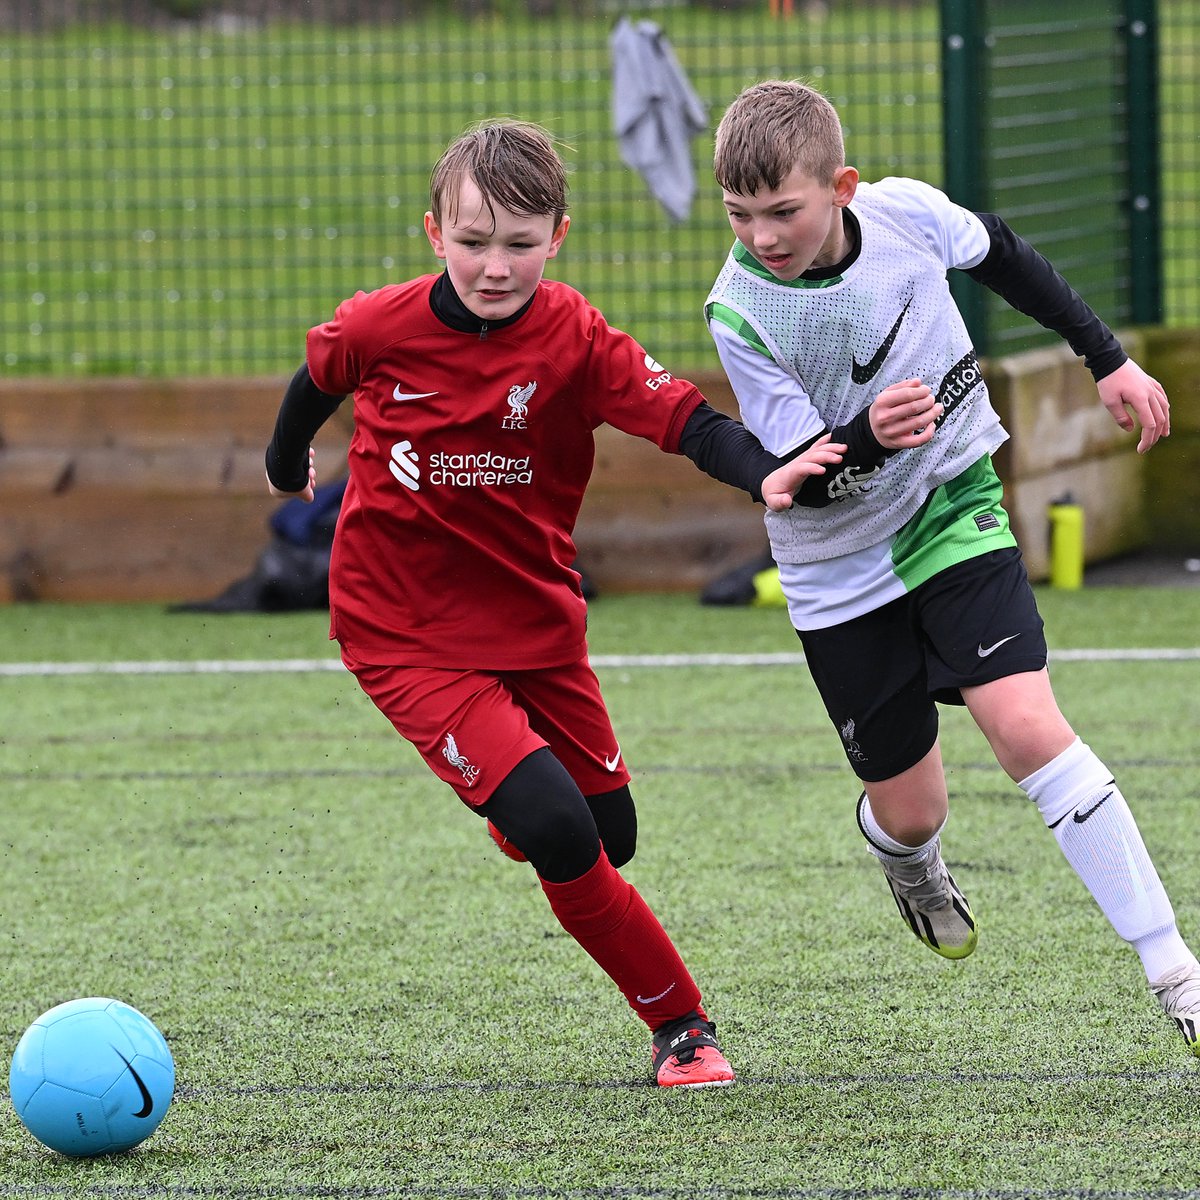 We are currently gathering interest for PDP Football Grassroots Competitions⚡ There is a wide selection of free and paid competitions for boys, girls & mixed teams of all levels from U6s – U15s! Register your team’s interest here: forms.office.com/e/ZHJLGs1UAq